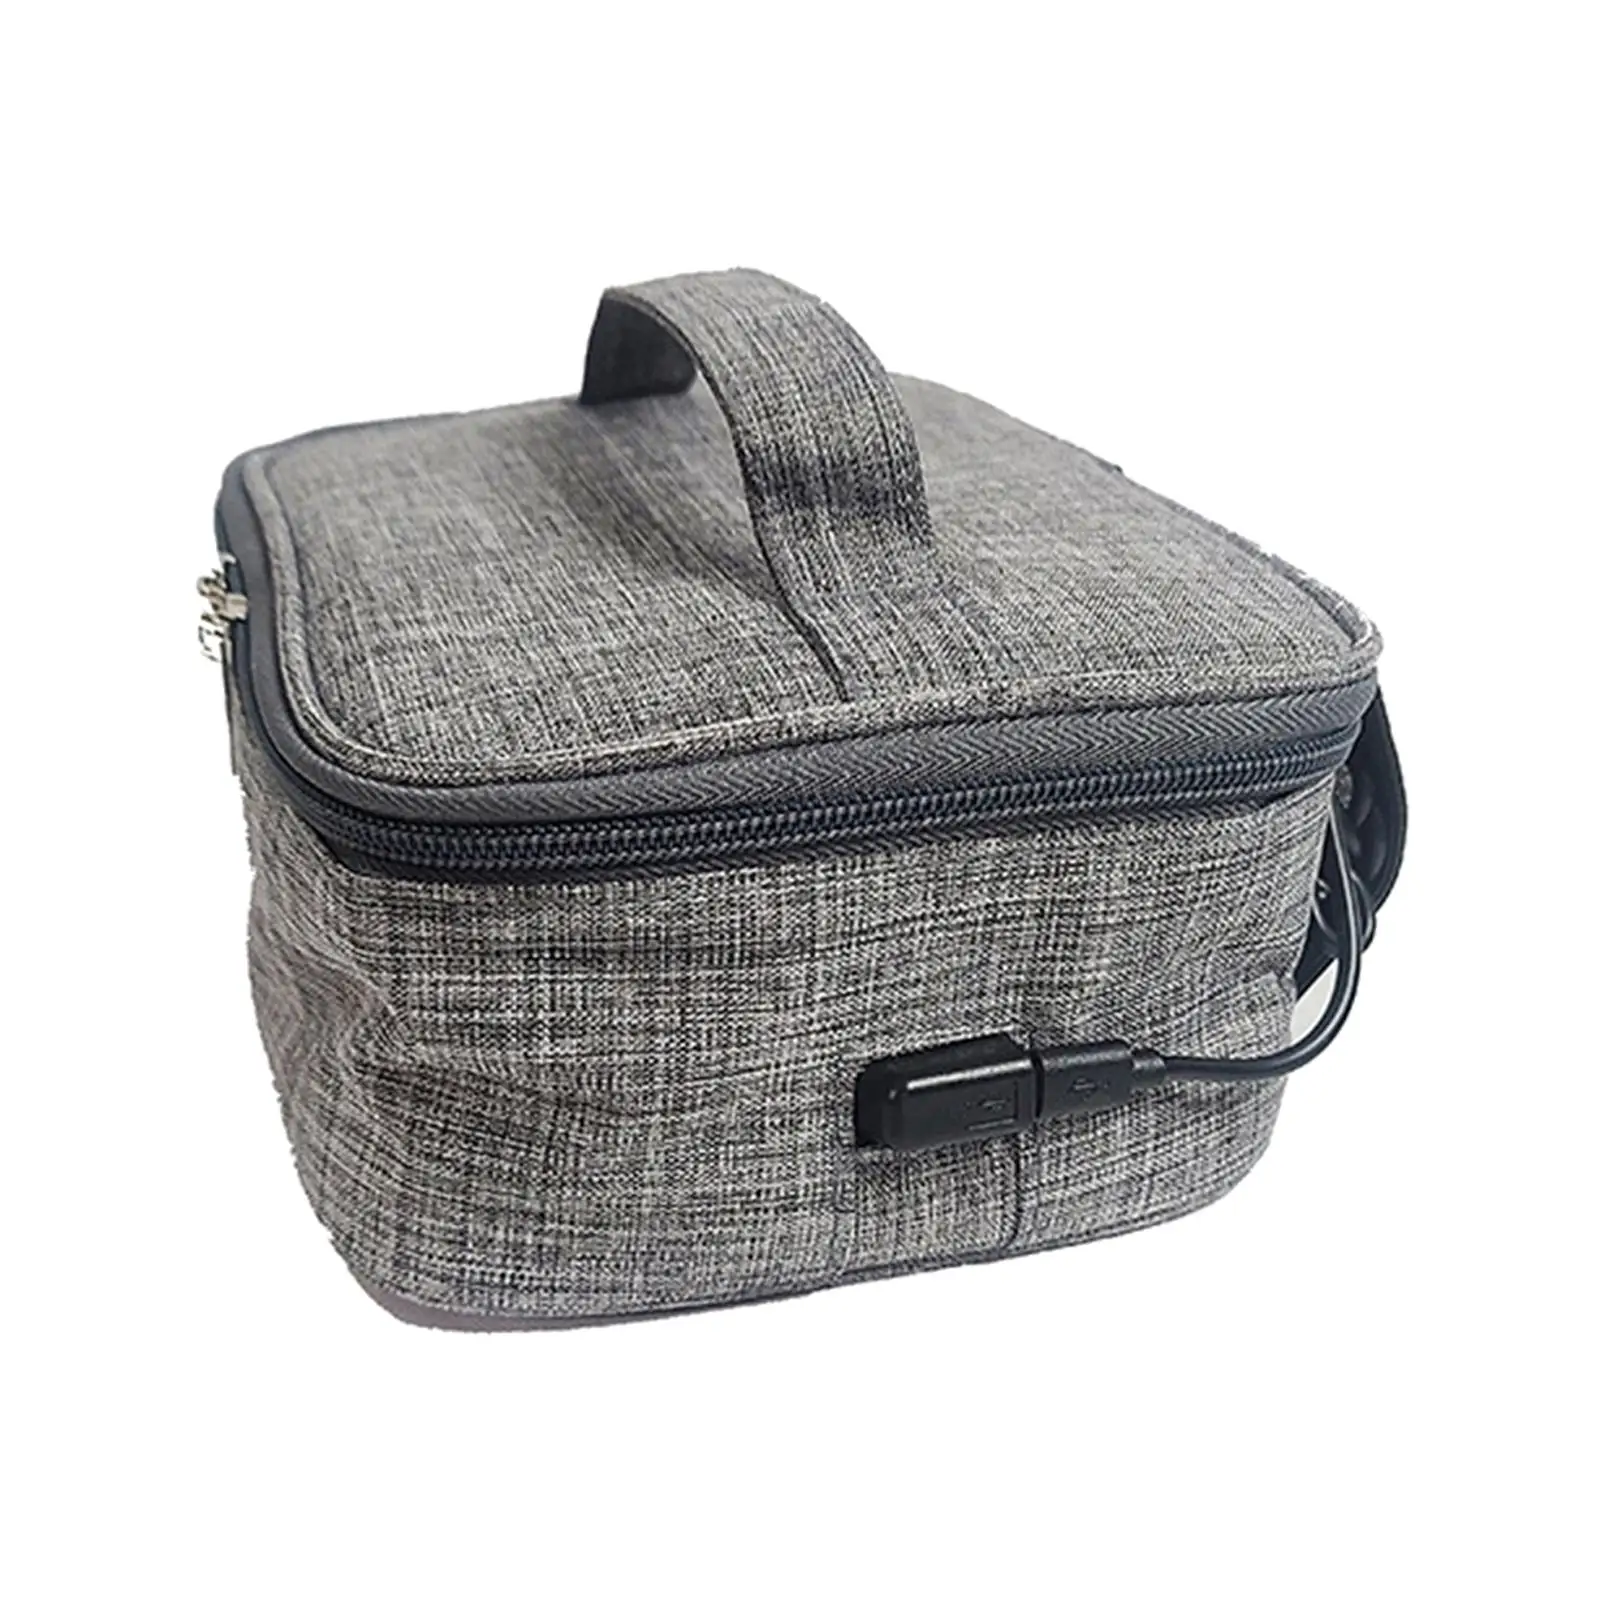 USB Heated Lunch Boxes Bag Container Oxford Cloth for Picnic Camping with Zipper ,Grey Convenient for Adults Reusable Durable